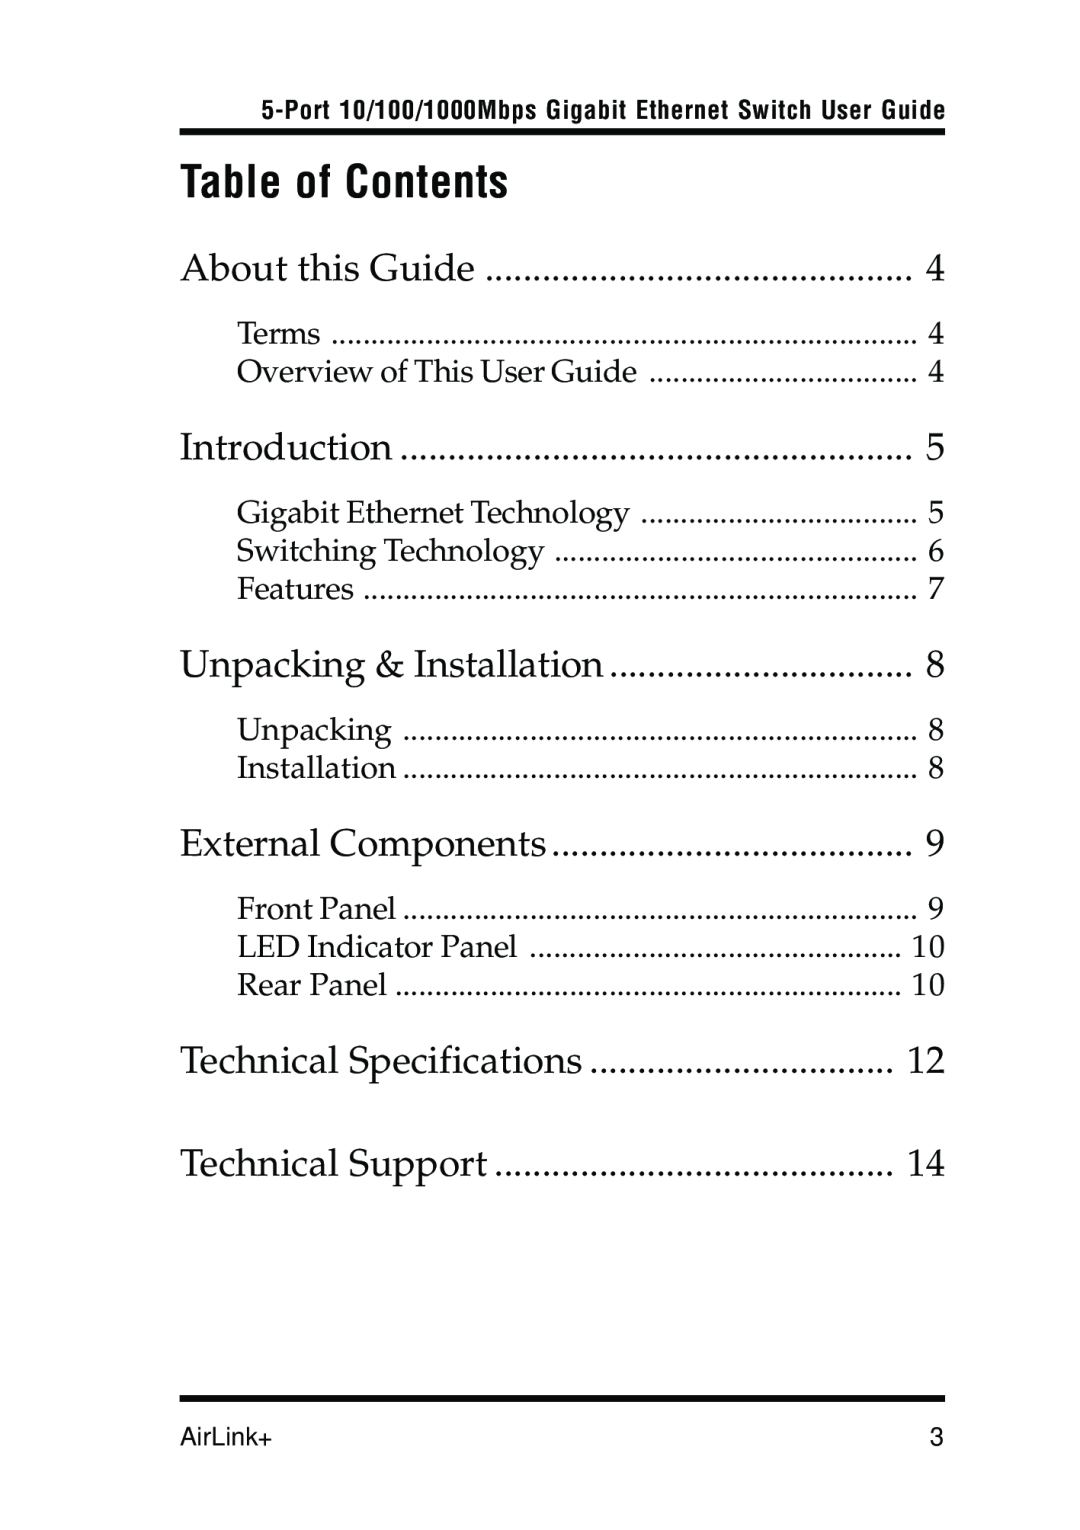 Airlink 5-Port manual Table of Contents, About this Guide, Introduction, Unpacking & Installation, External Components 